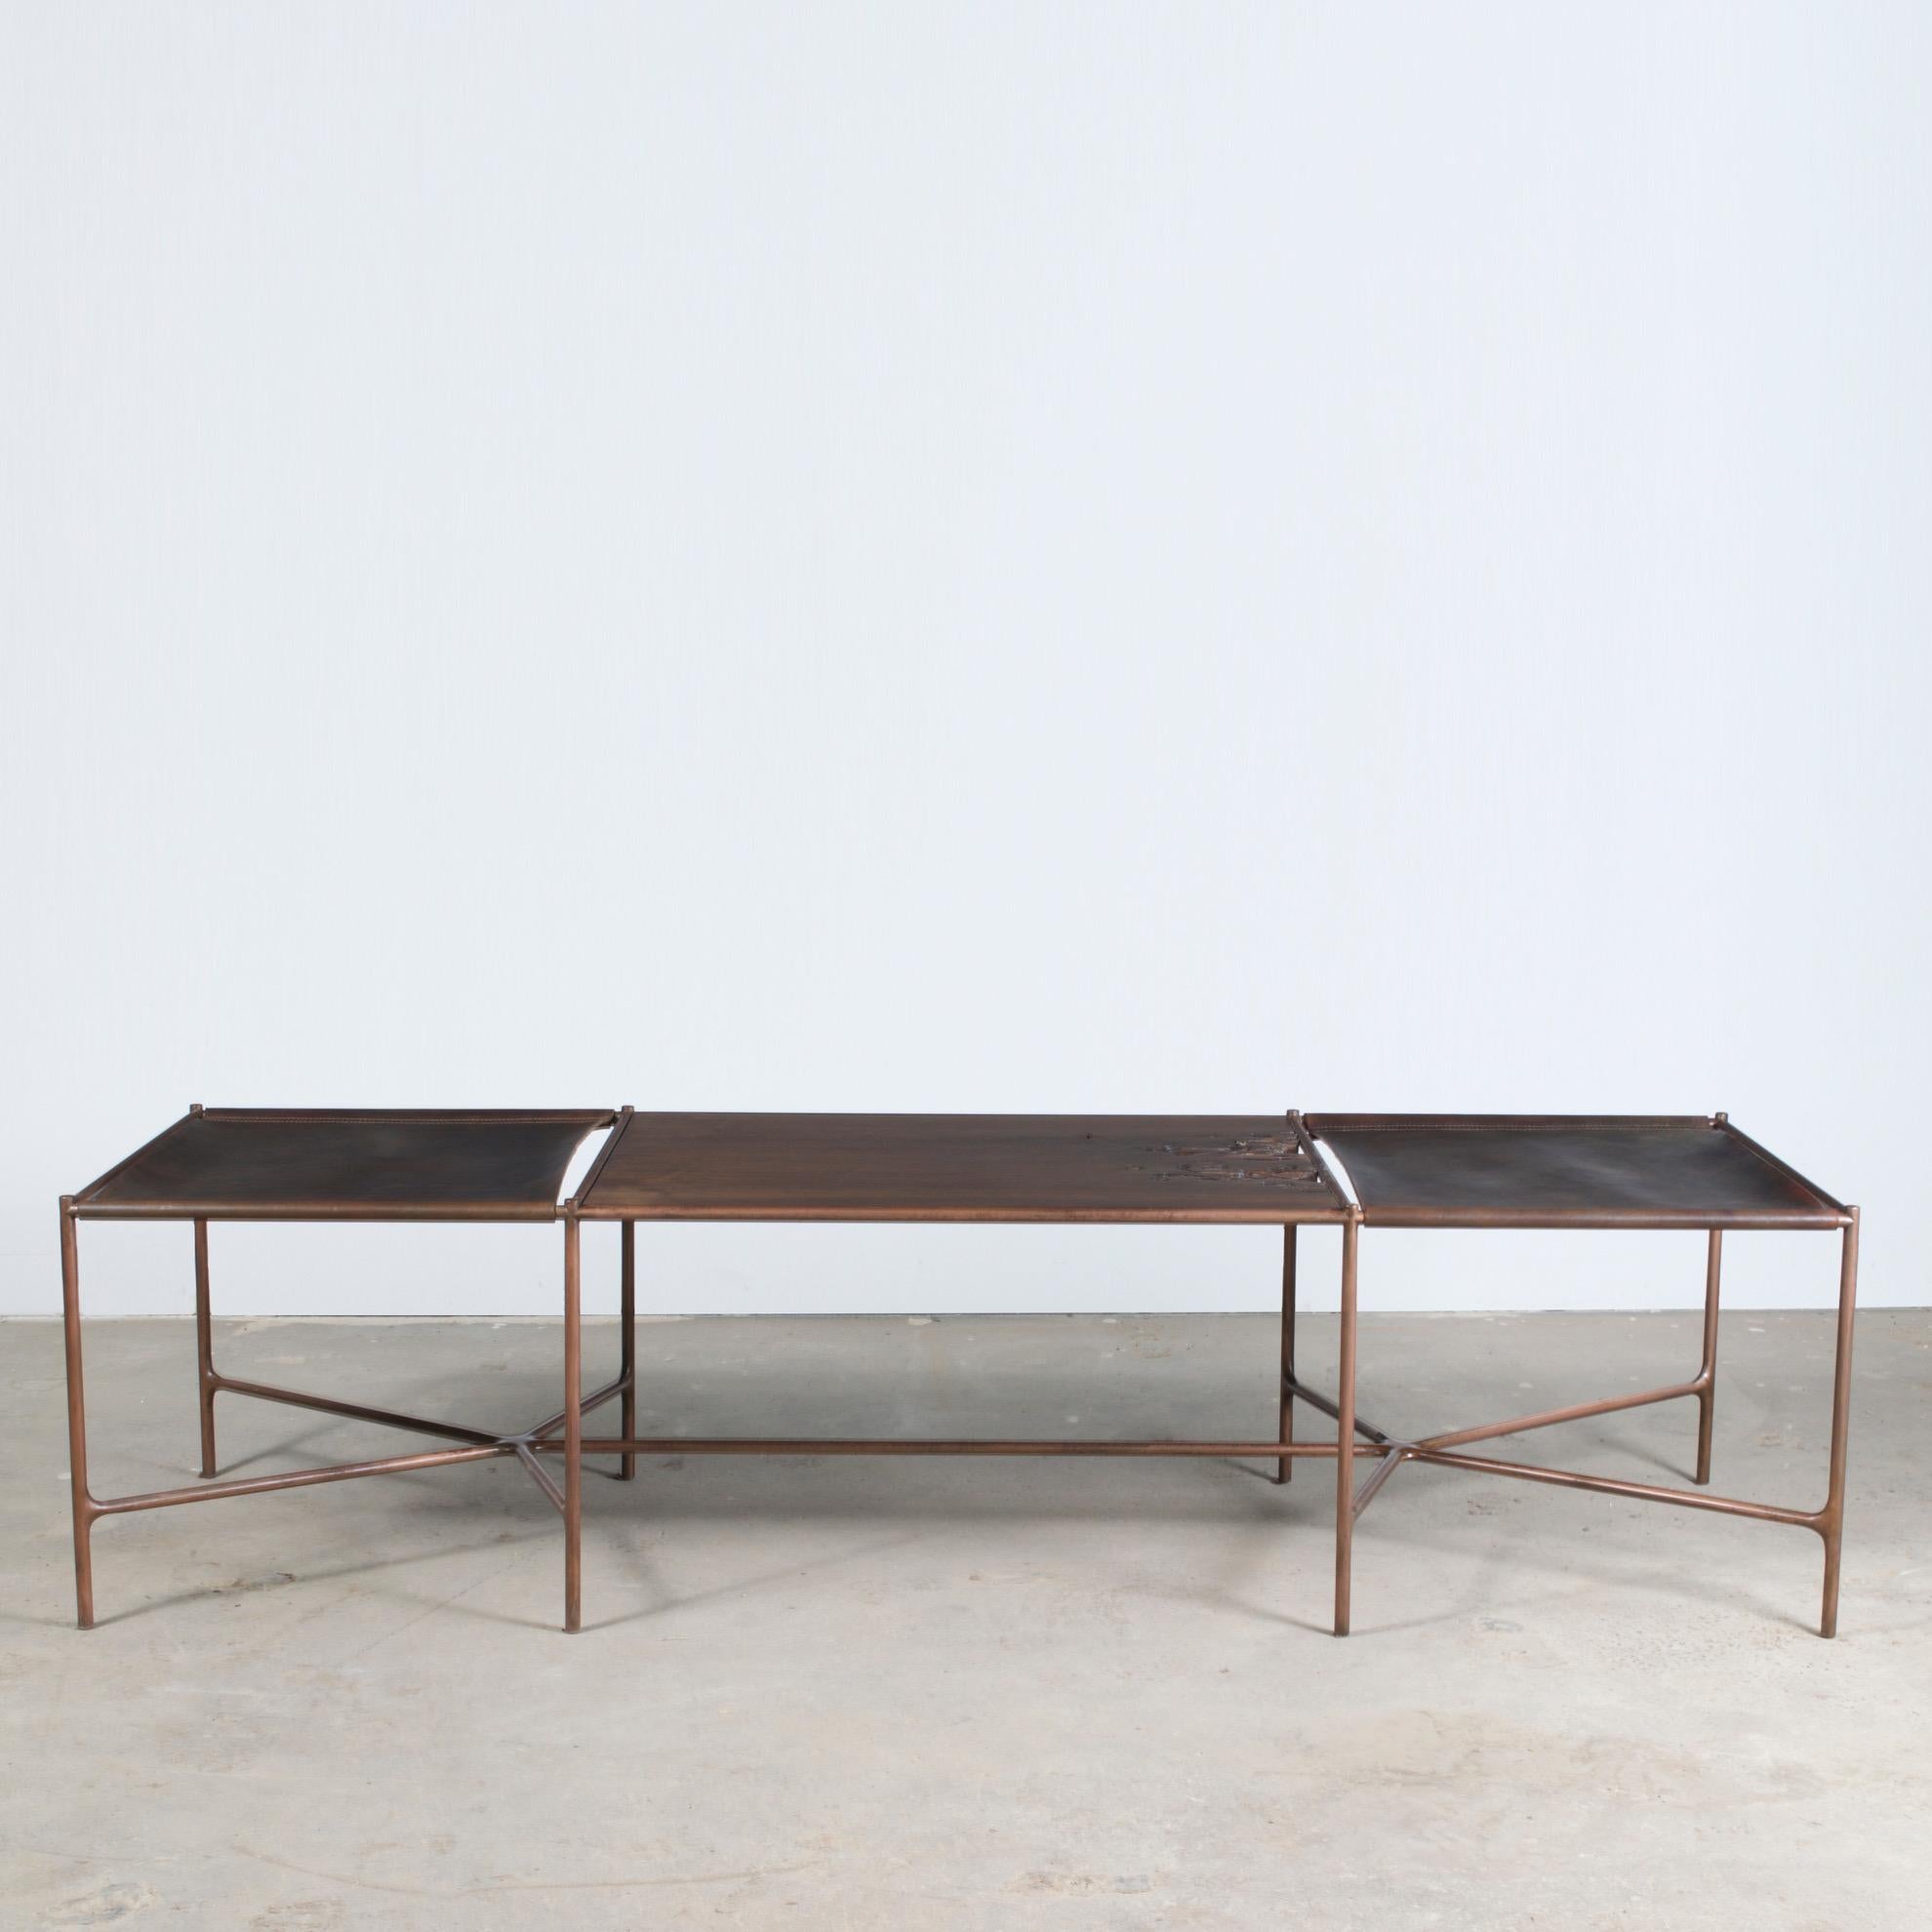 Oiled cast bronze, saddle tanned leather, and organic oxidized walnut. 

Designed by master craftsman Jacob Wener, through his company Modern Industry Design, this bench is one of the first iterations of his Web Series. The cast bronze base serves